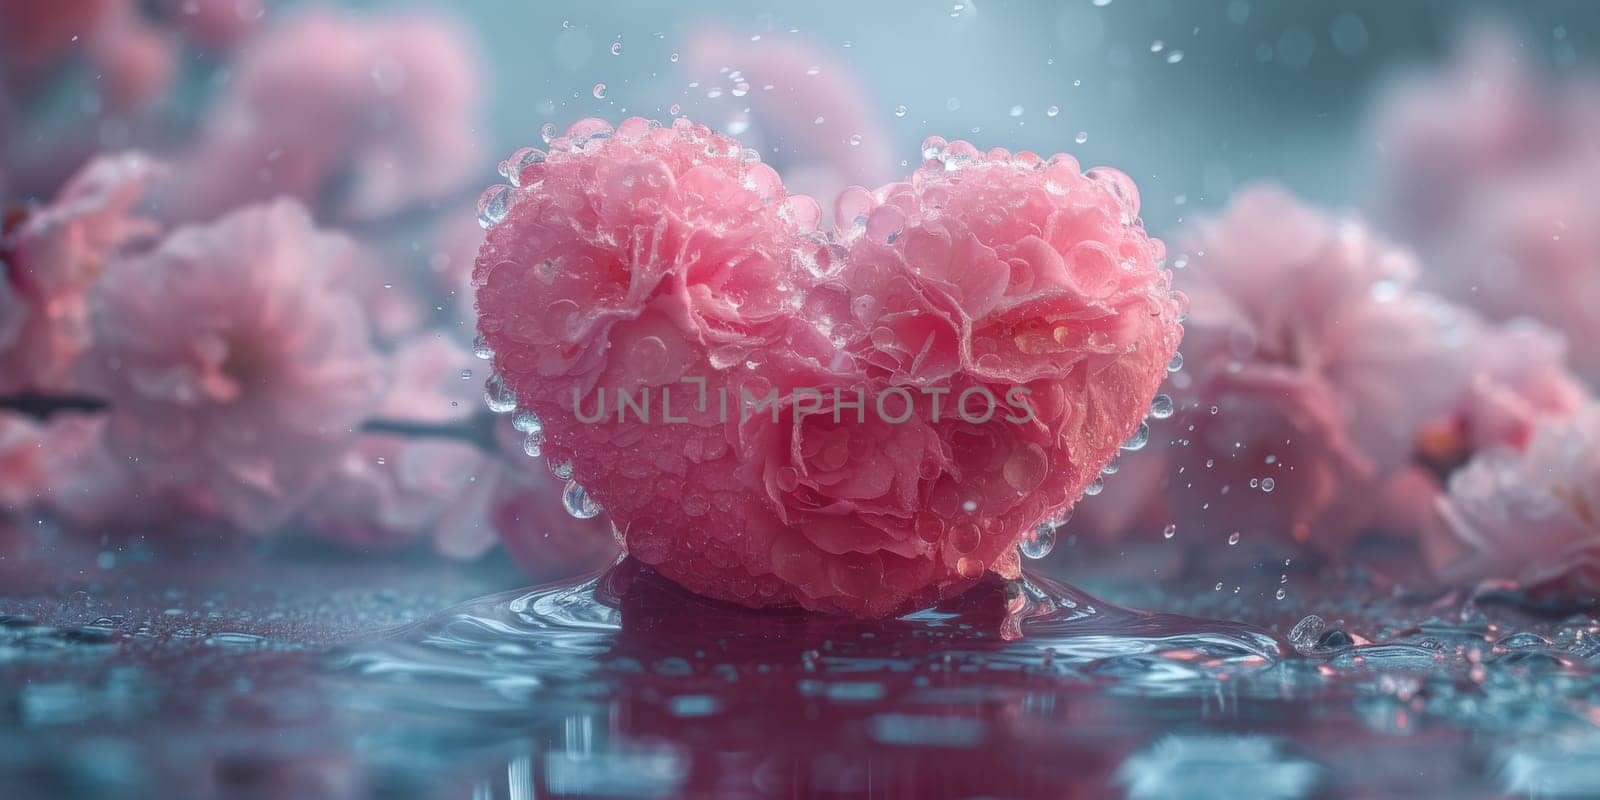 3D heart with pink roses, against a background of clouds.